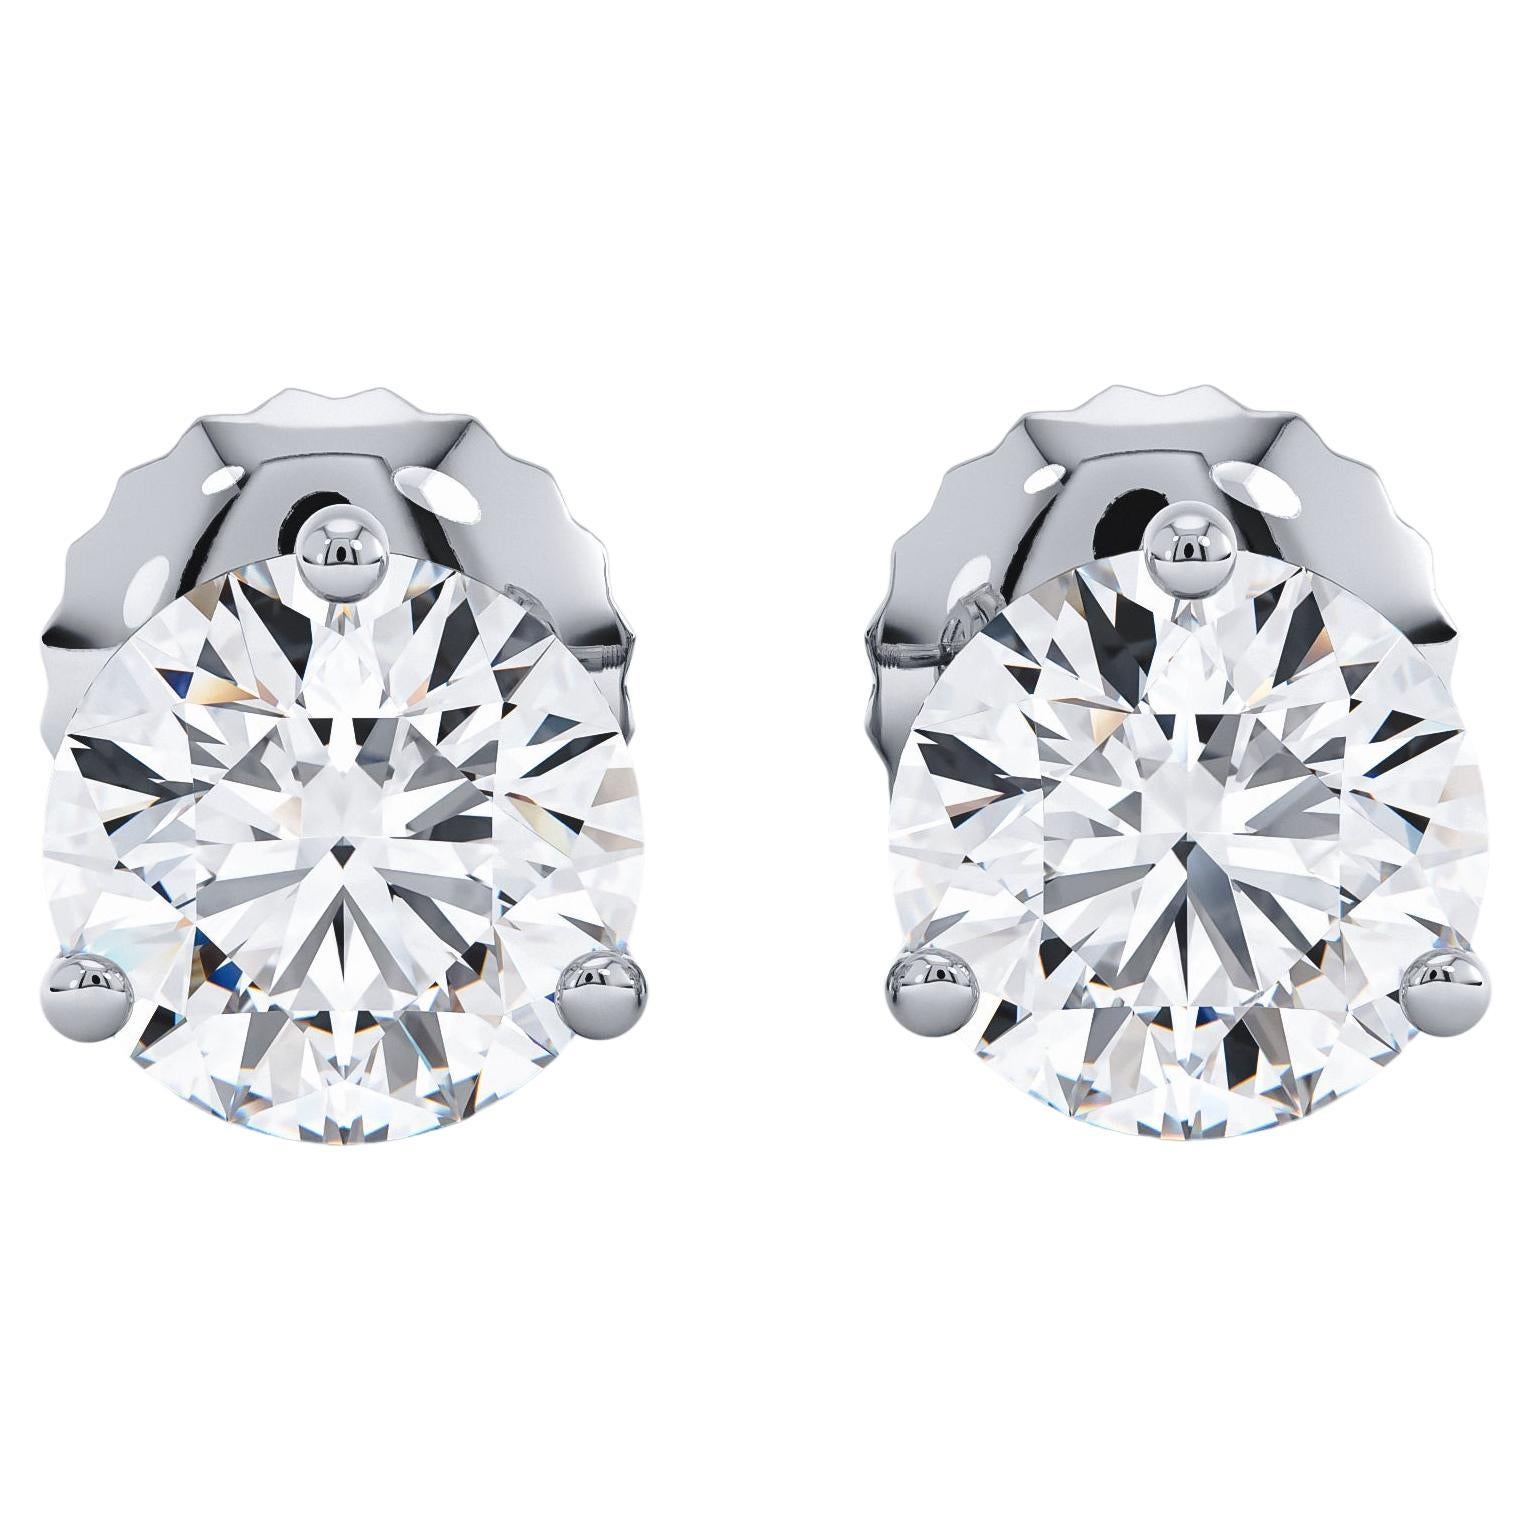 3 Carat Total Diamond Weight Natural Diamond Stud Earrings with Screwbacks For Sale